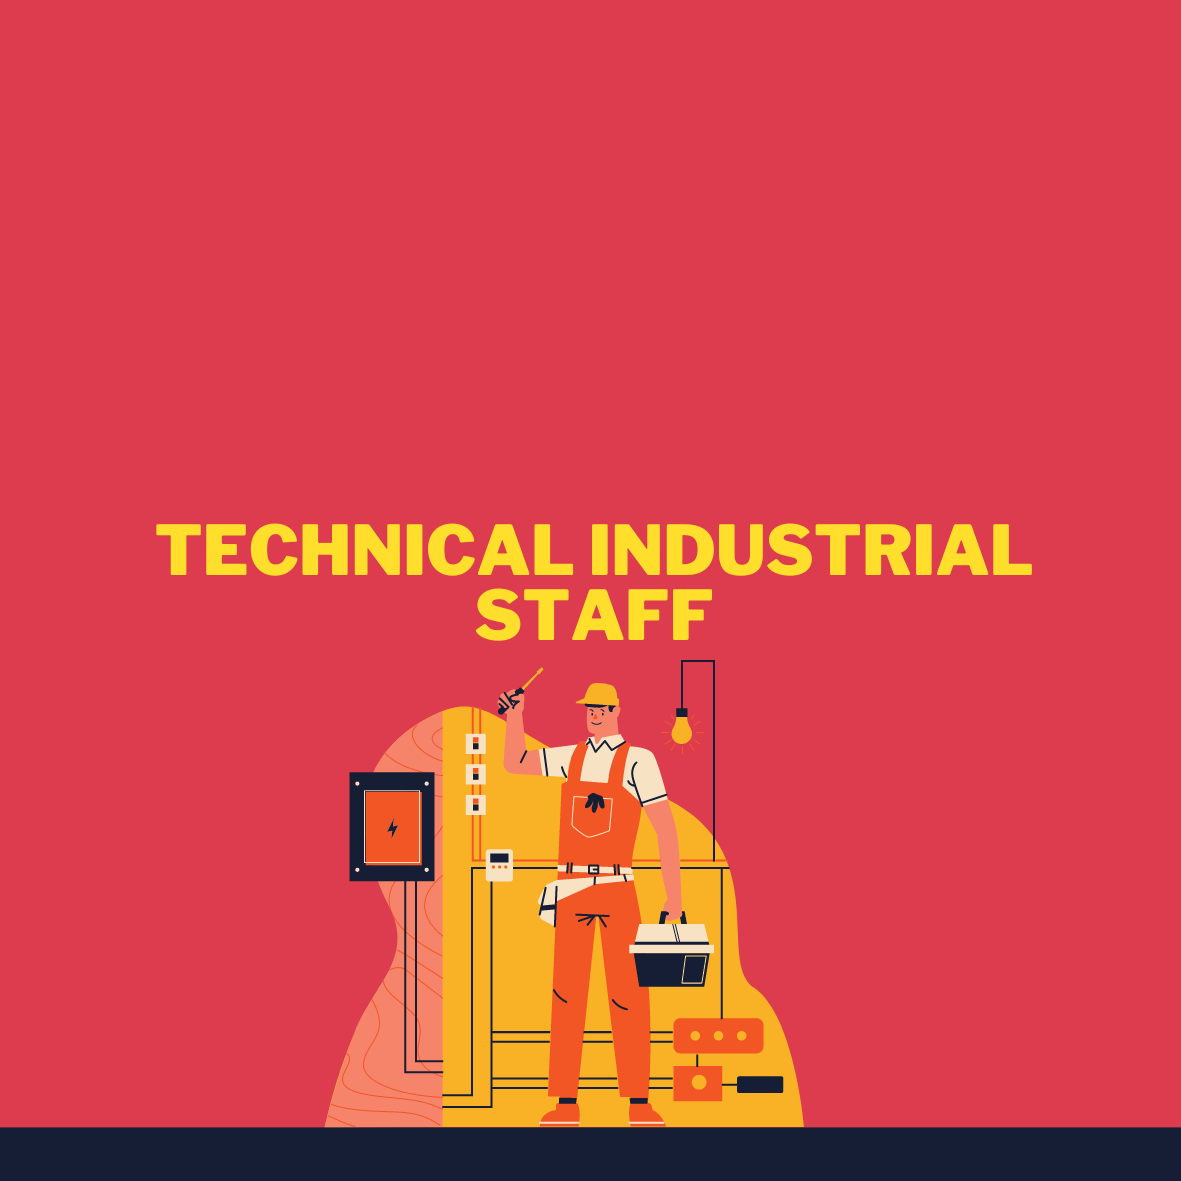 Technical industrial